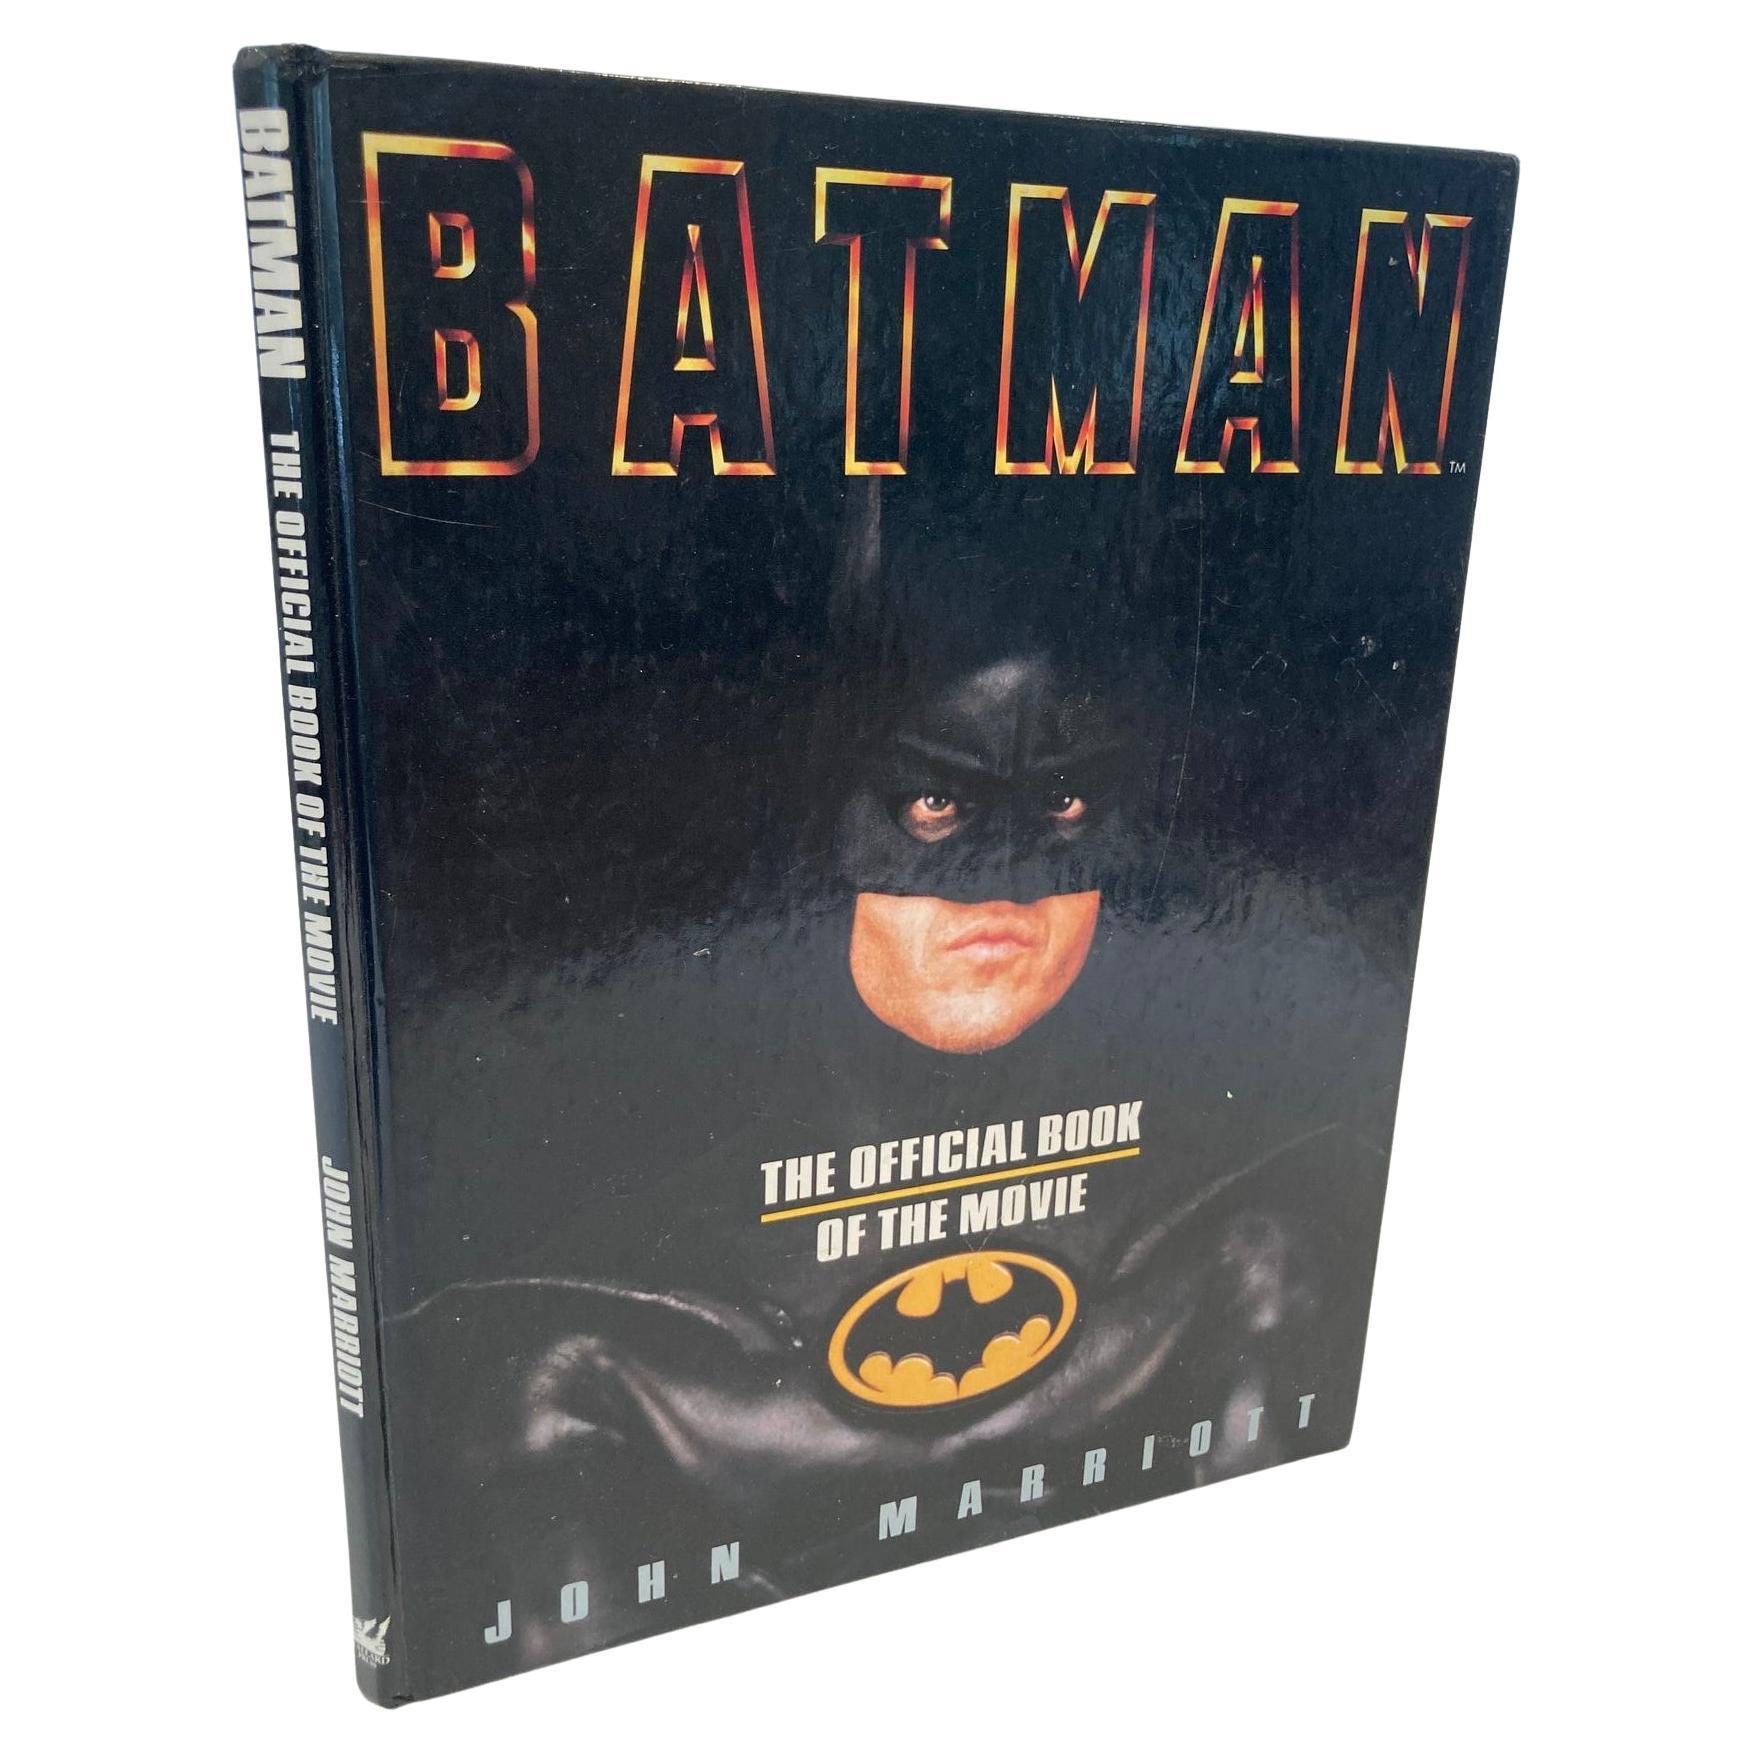 Batman: the Official Book of the Movie by John Marriott Hardcover, 1989 For Sale